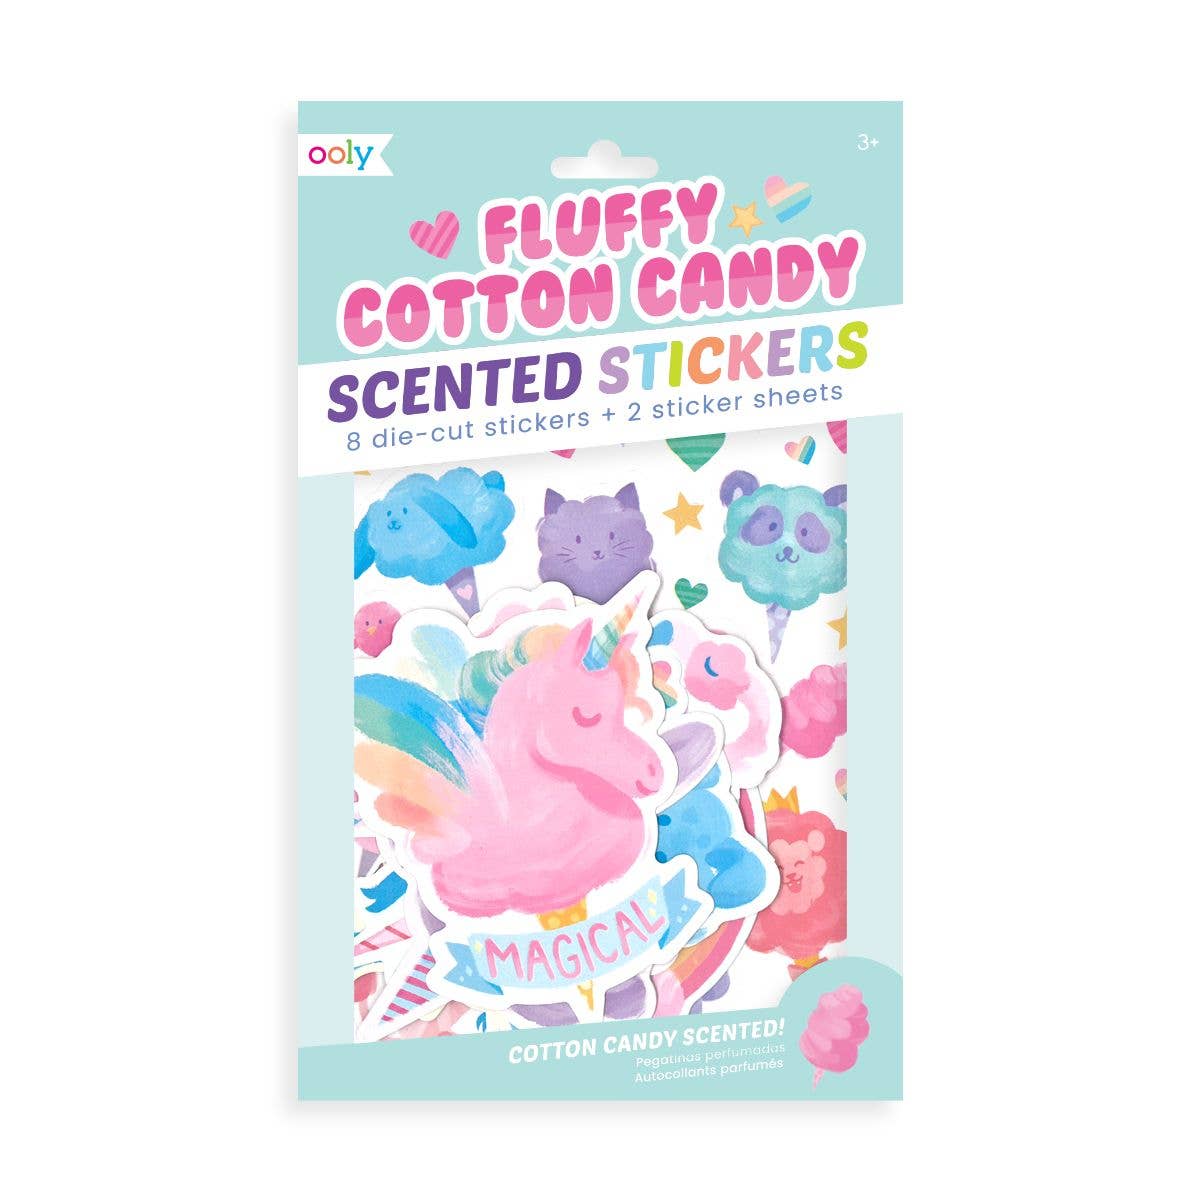 Fluffy Cotton Candy Scented Stickers – the blue béret